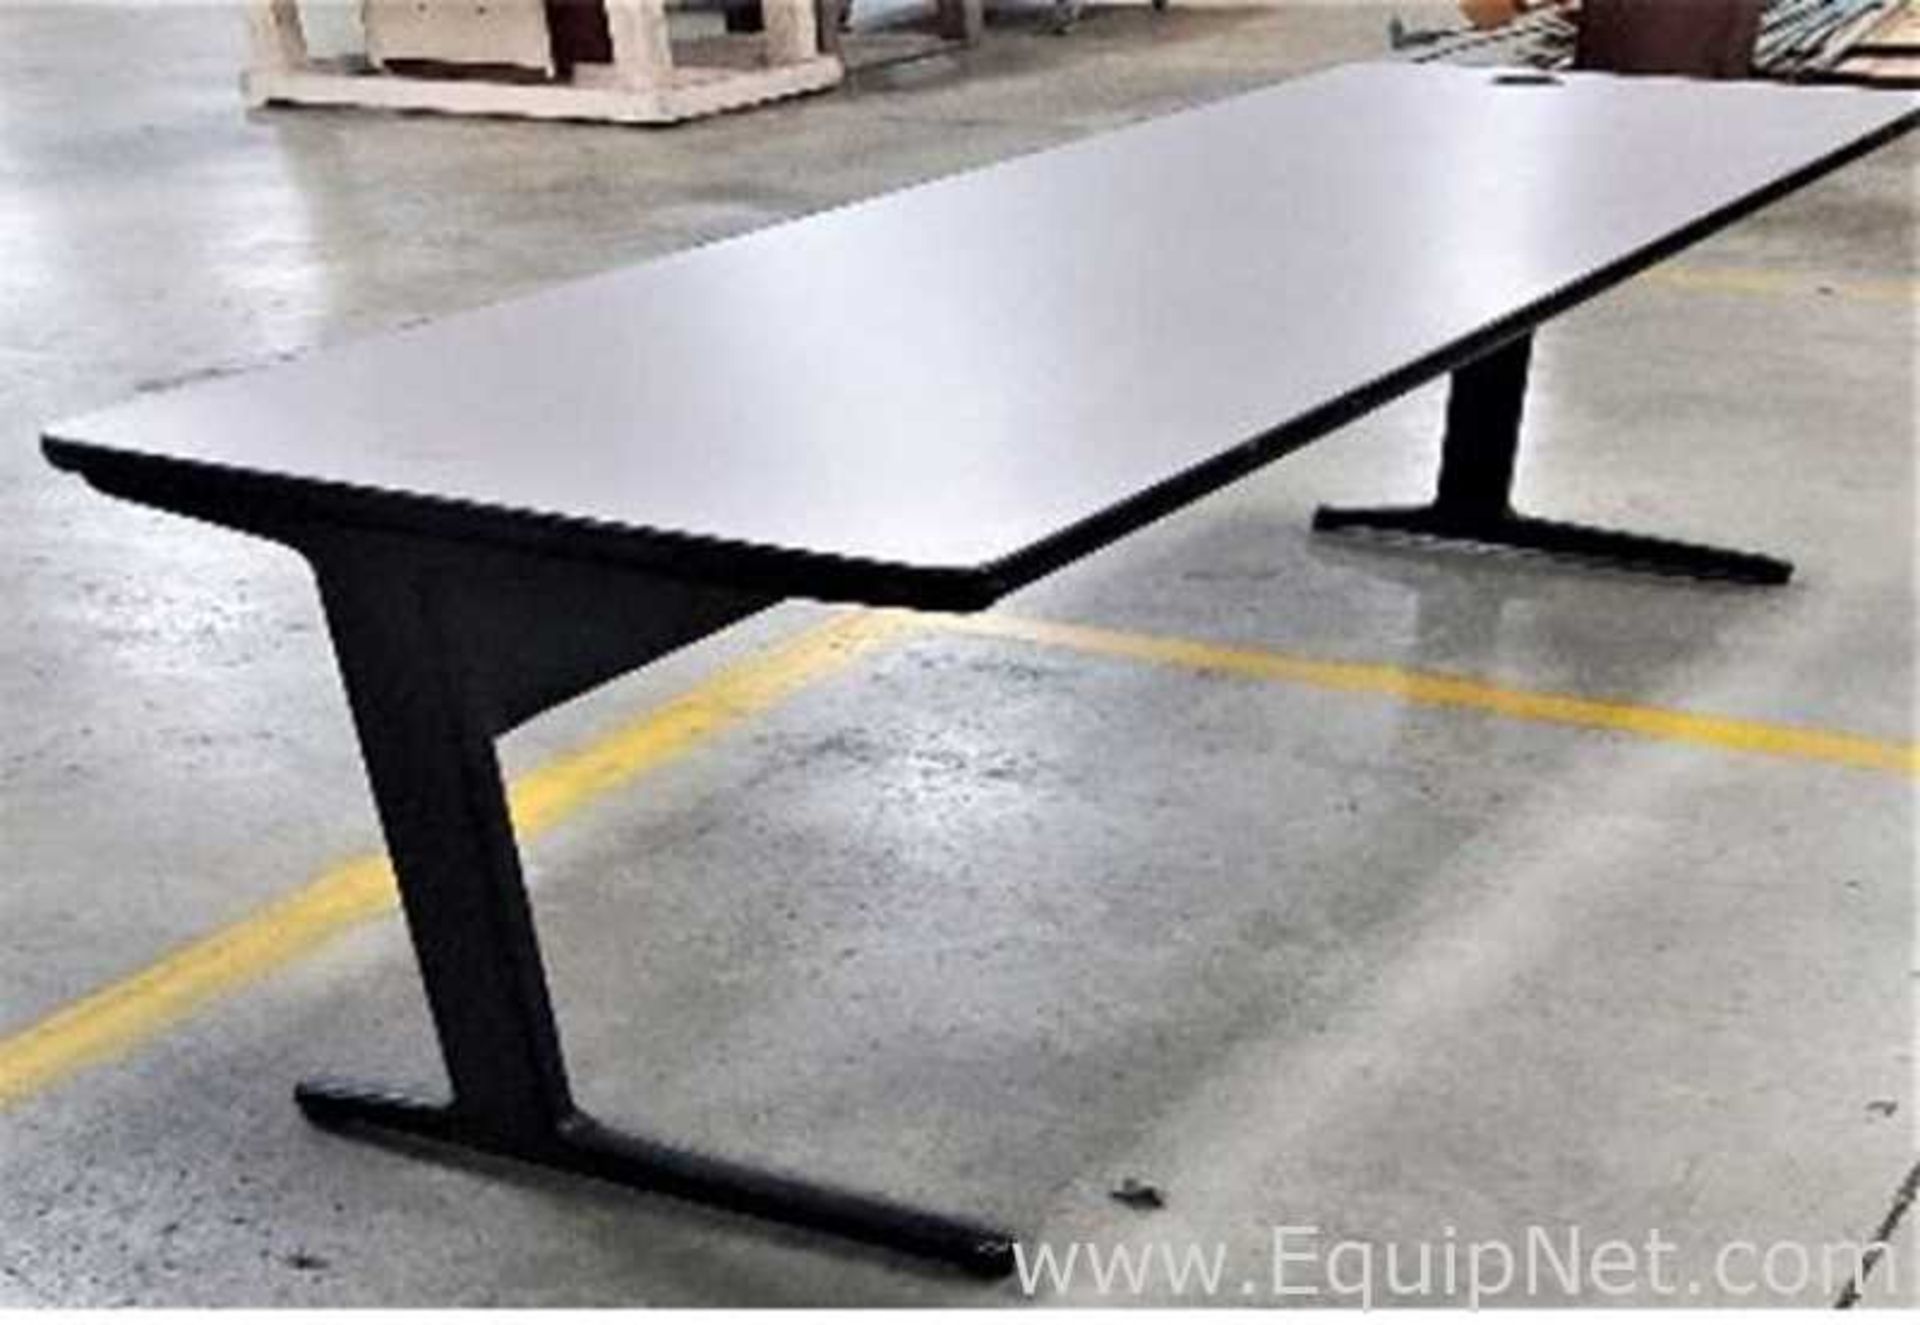 Lot of 2 Workstation Tables - Image 2 of 2